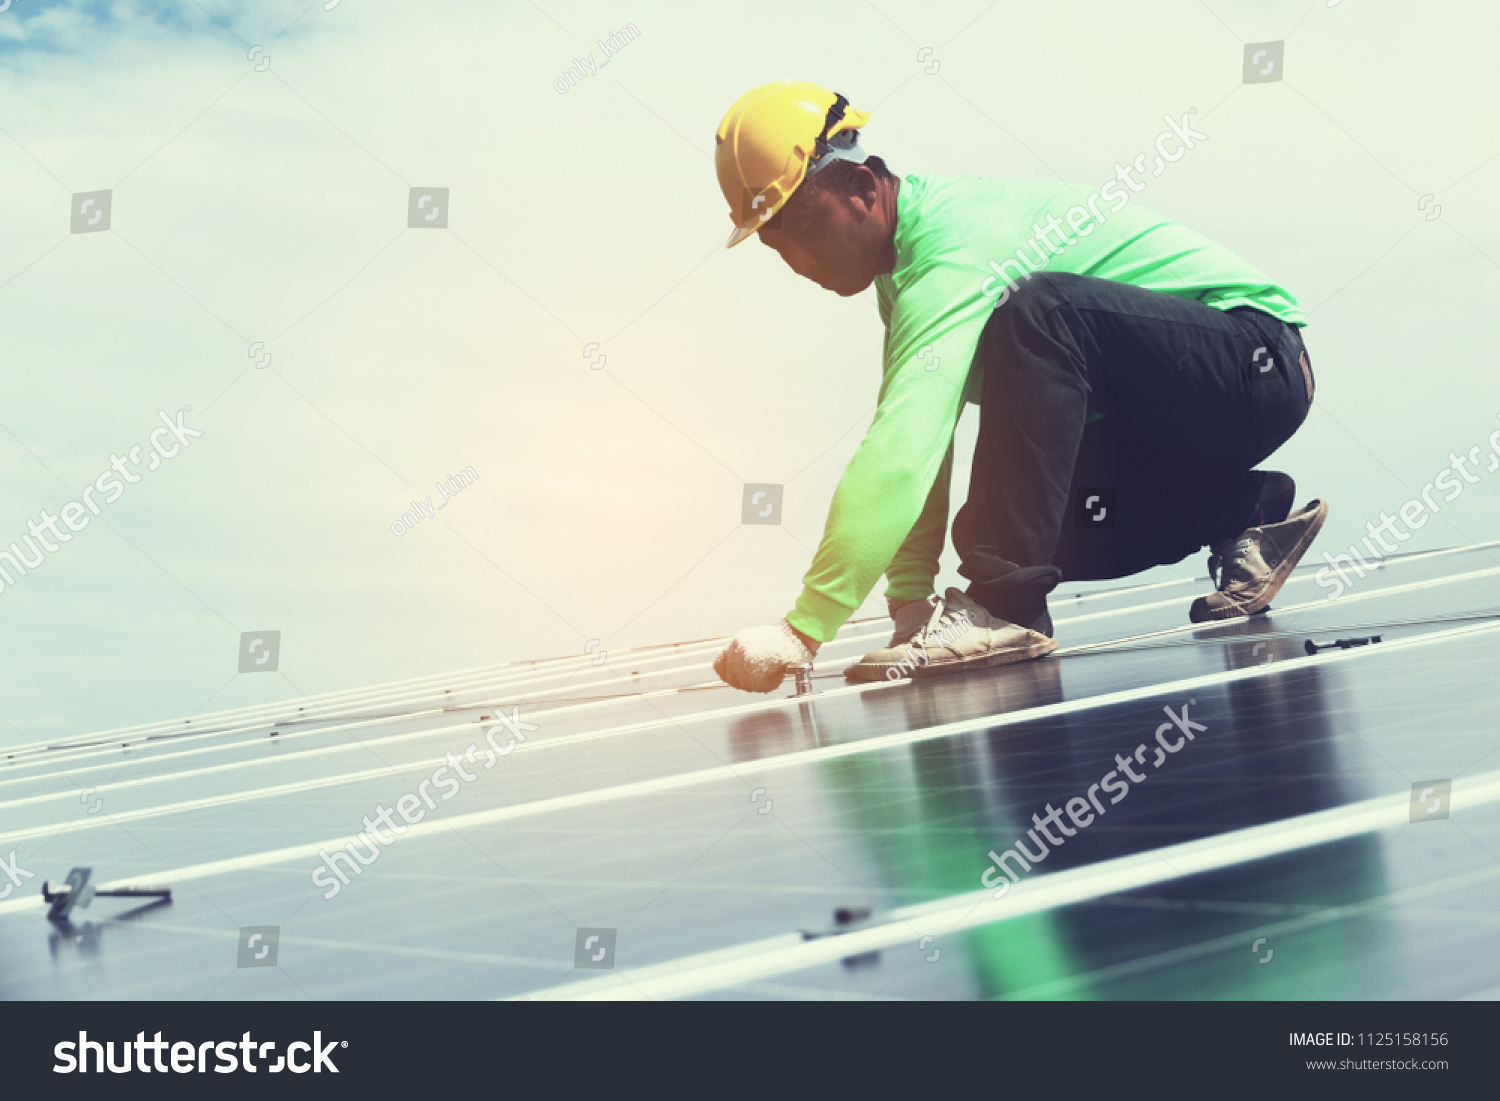 engineer team working on replacement solar panel in solar power plant;engineer and electrician team swapping and install solar panel after solar panel voltage drop
 #1125158156